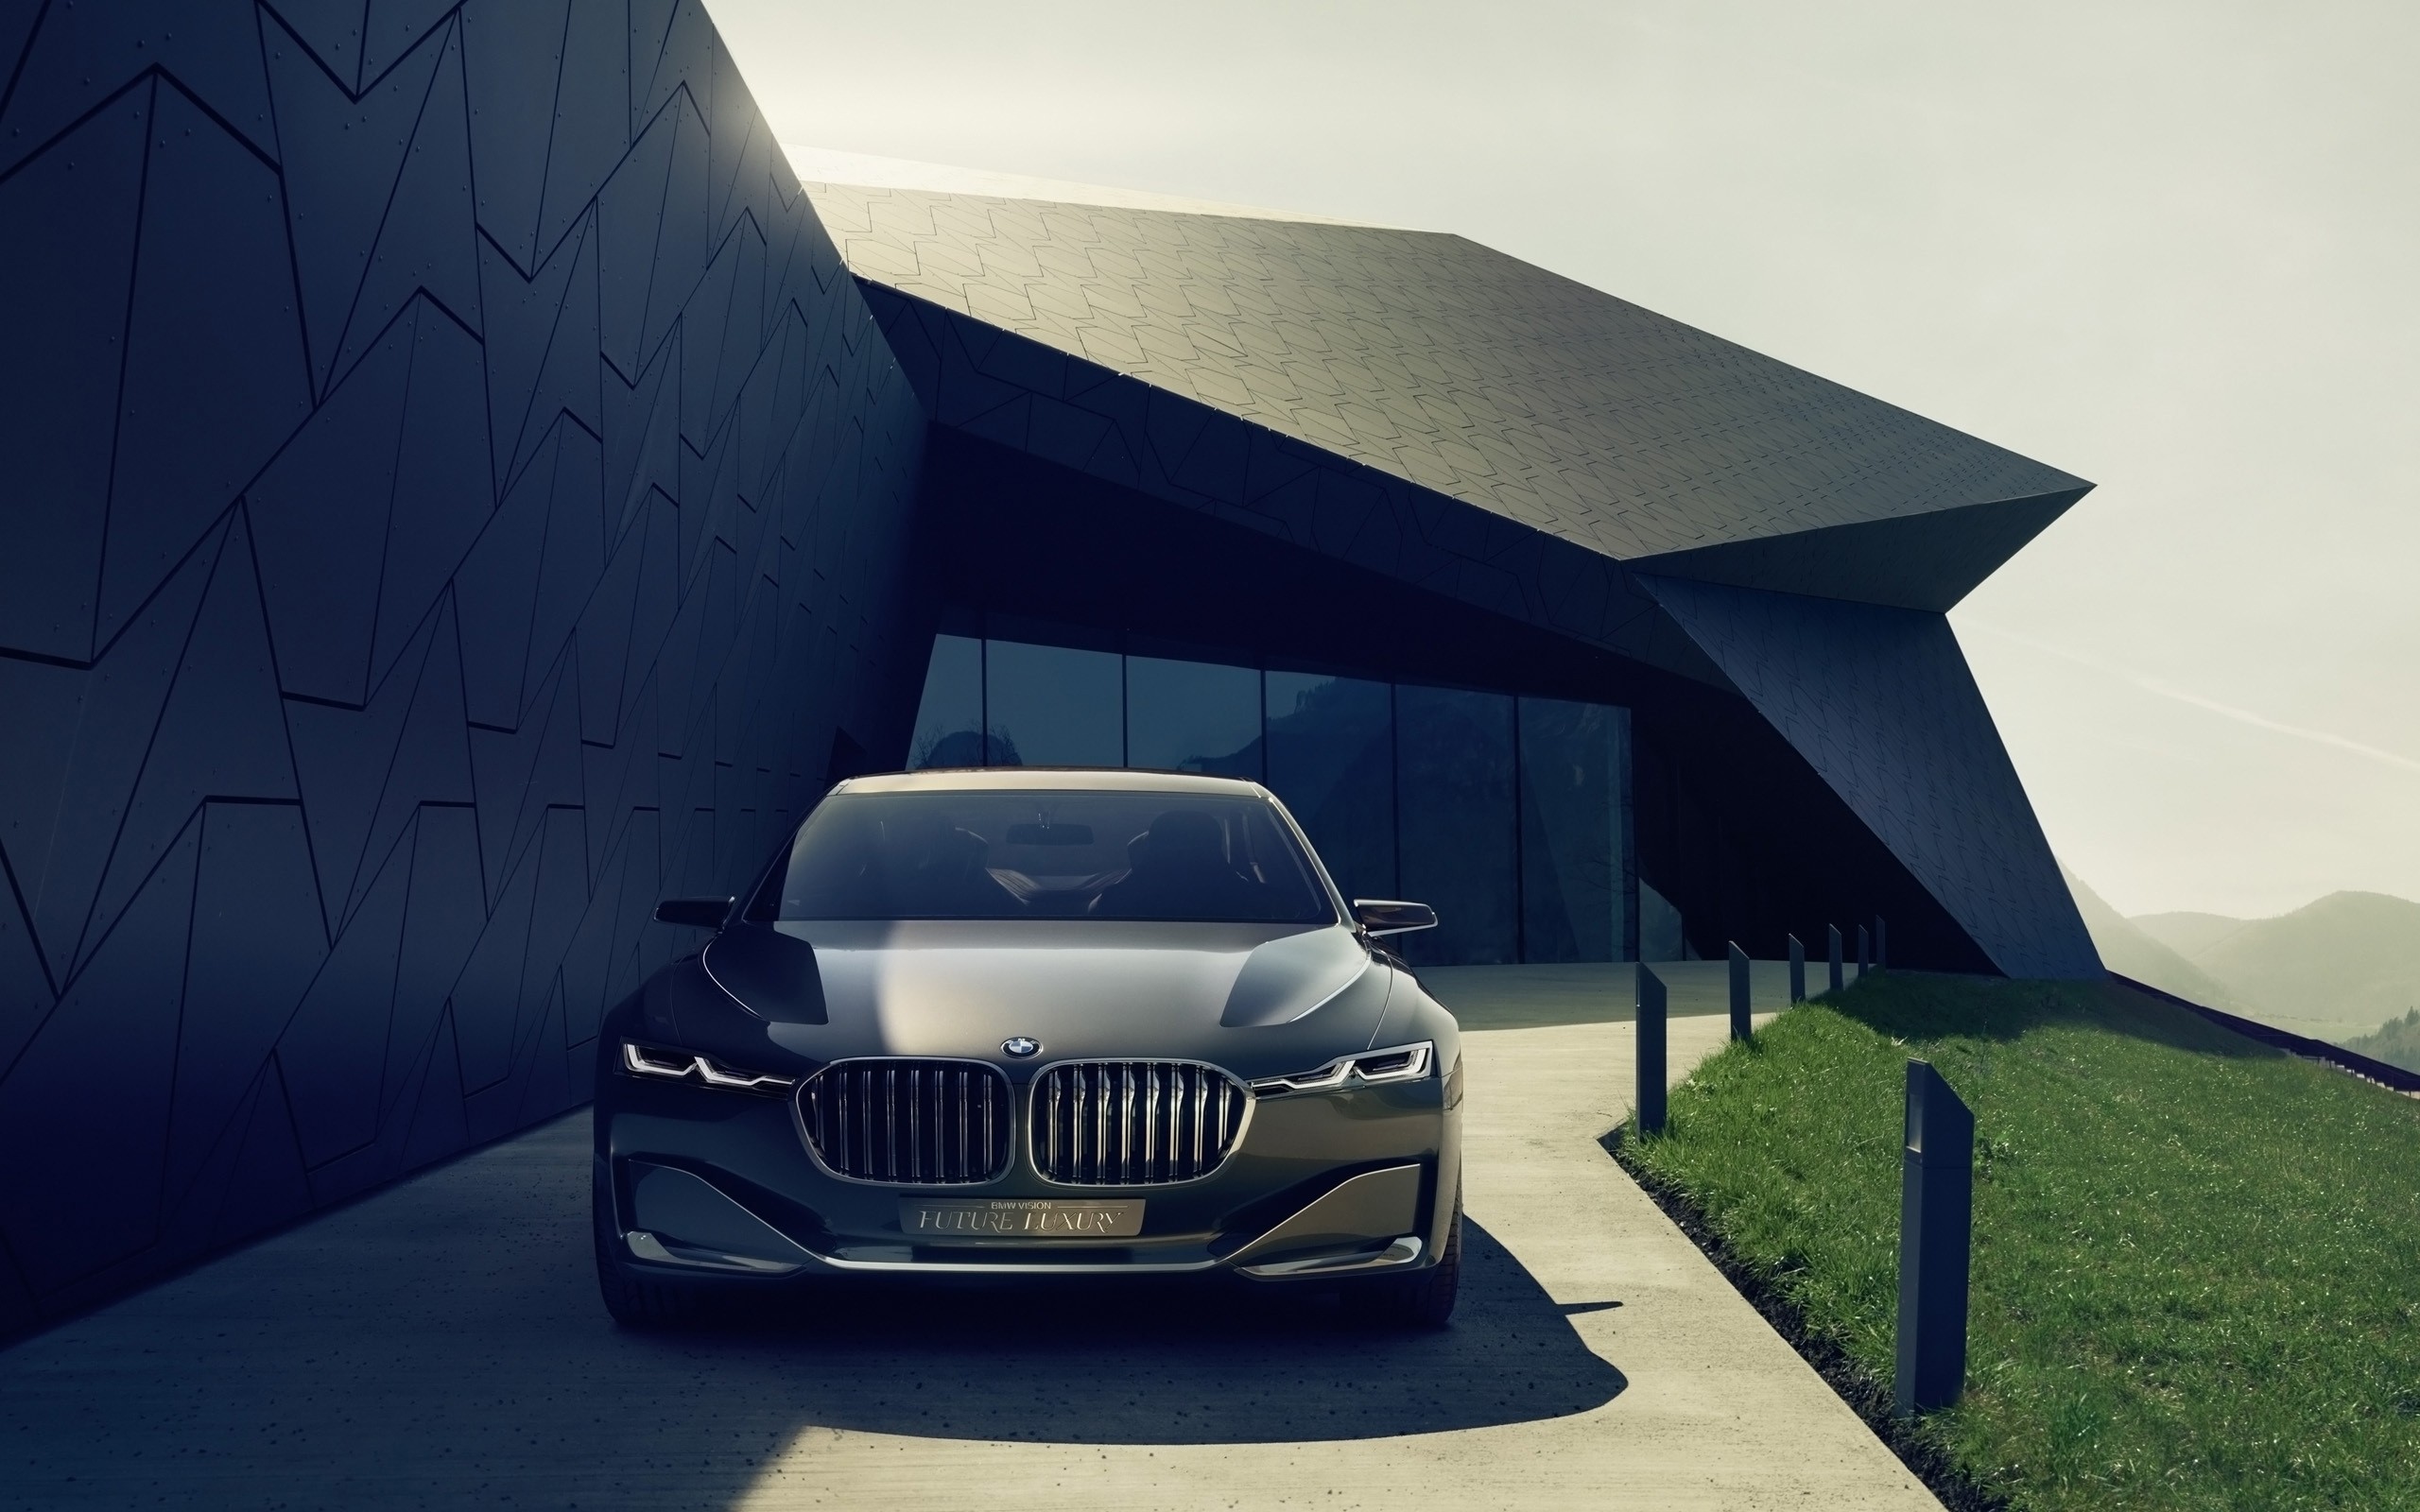 General 2560x1600 nature landscape modern architecture car BMW grass glass house hills BMW Vision German cars sunlight frontal view headlights